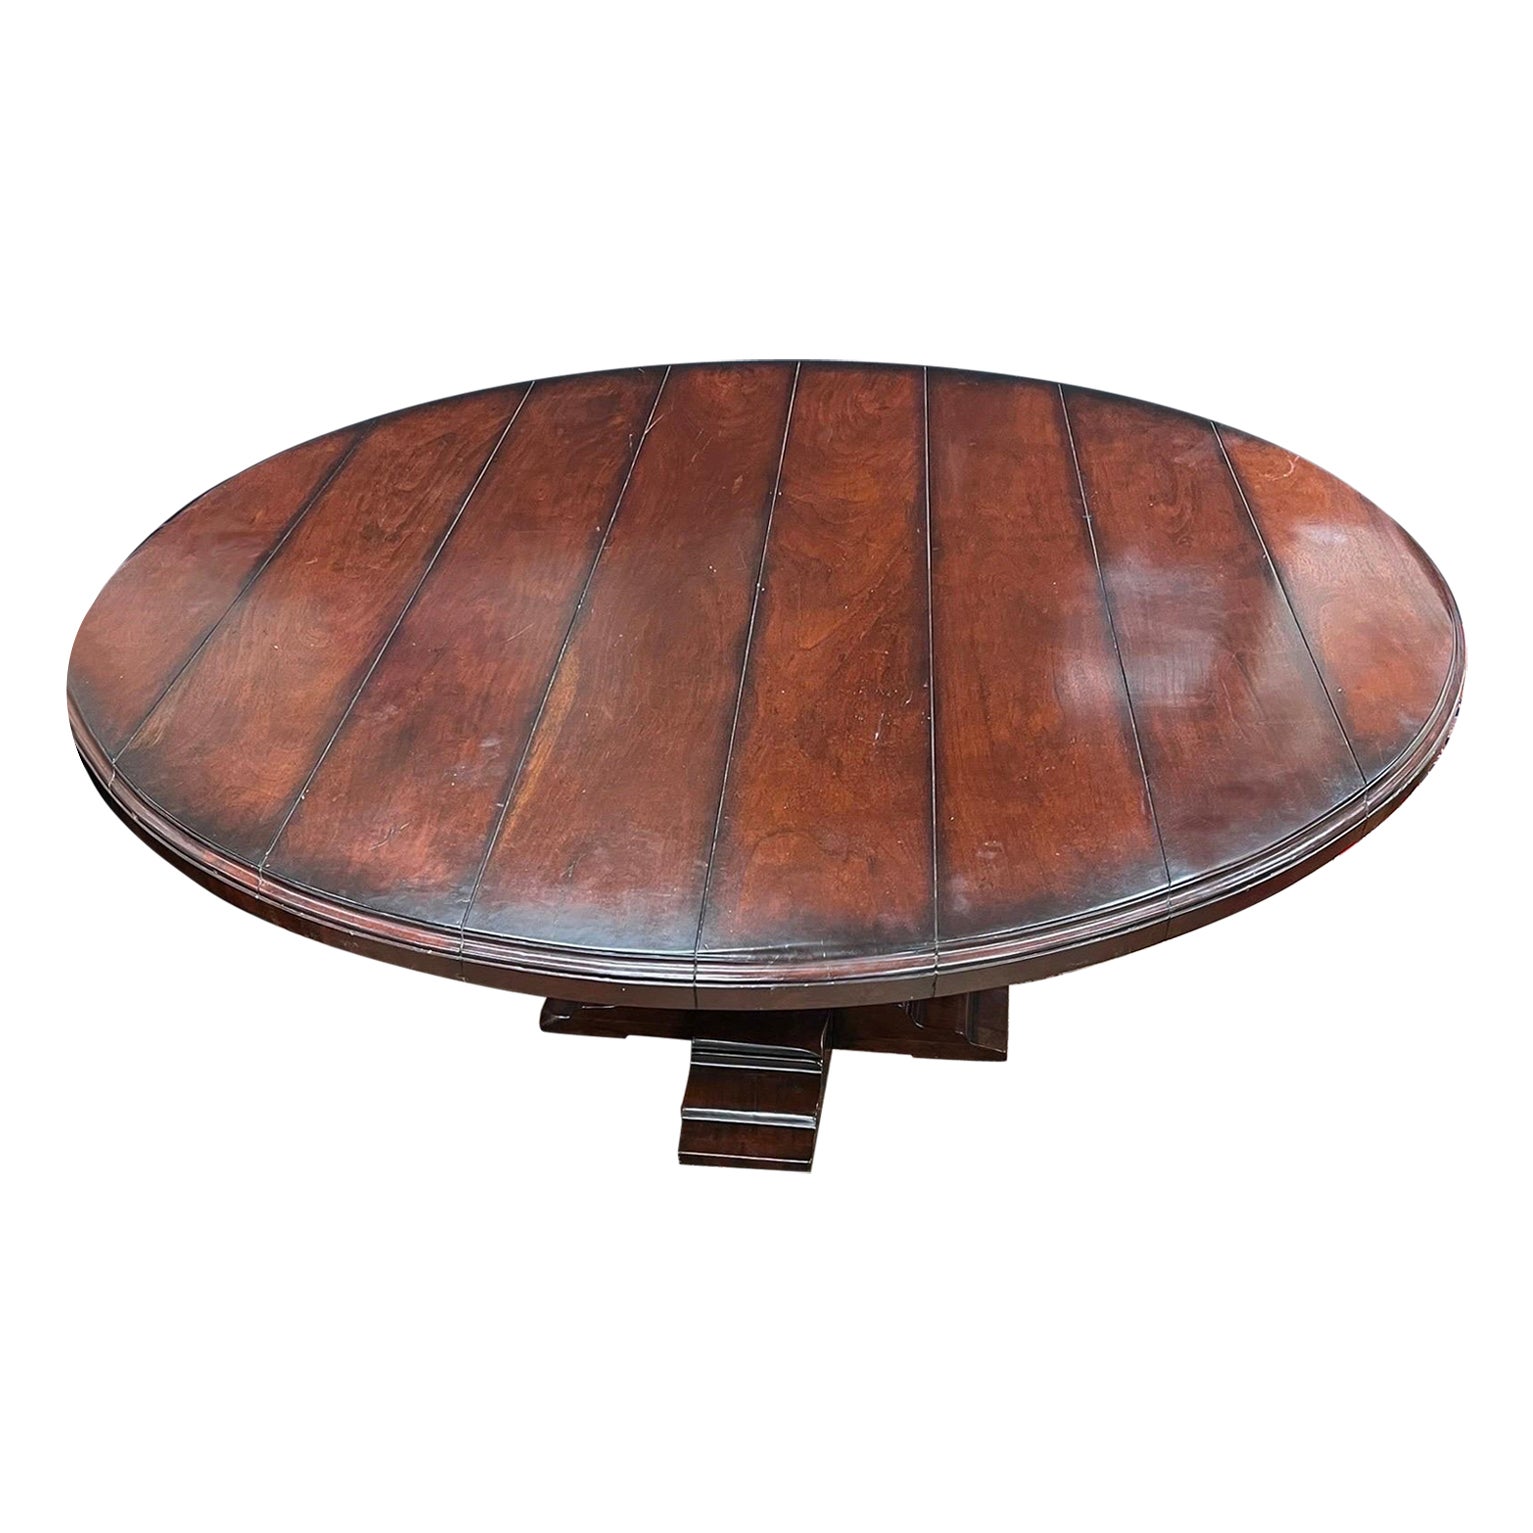 Sarreid Chatham Crossing 72"D Round Wood Plank Pedestal Dining Room Table